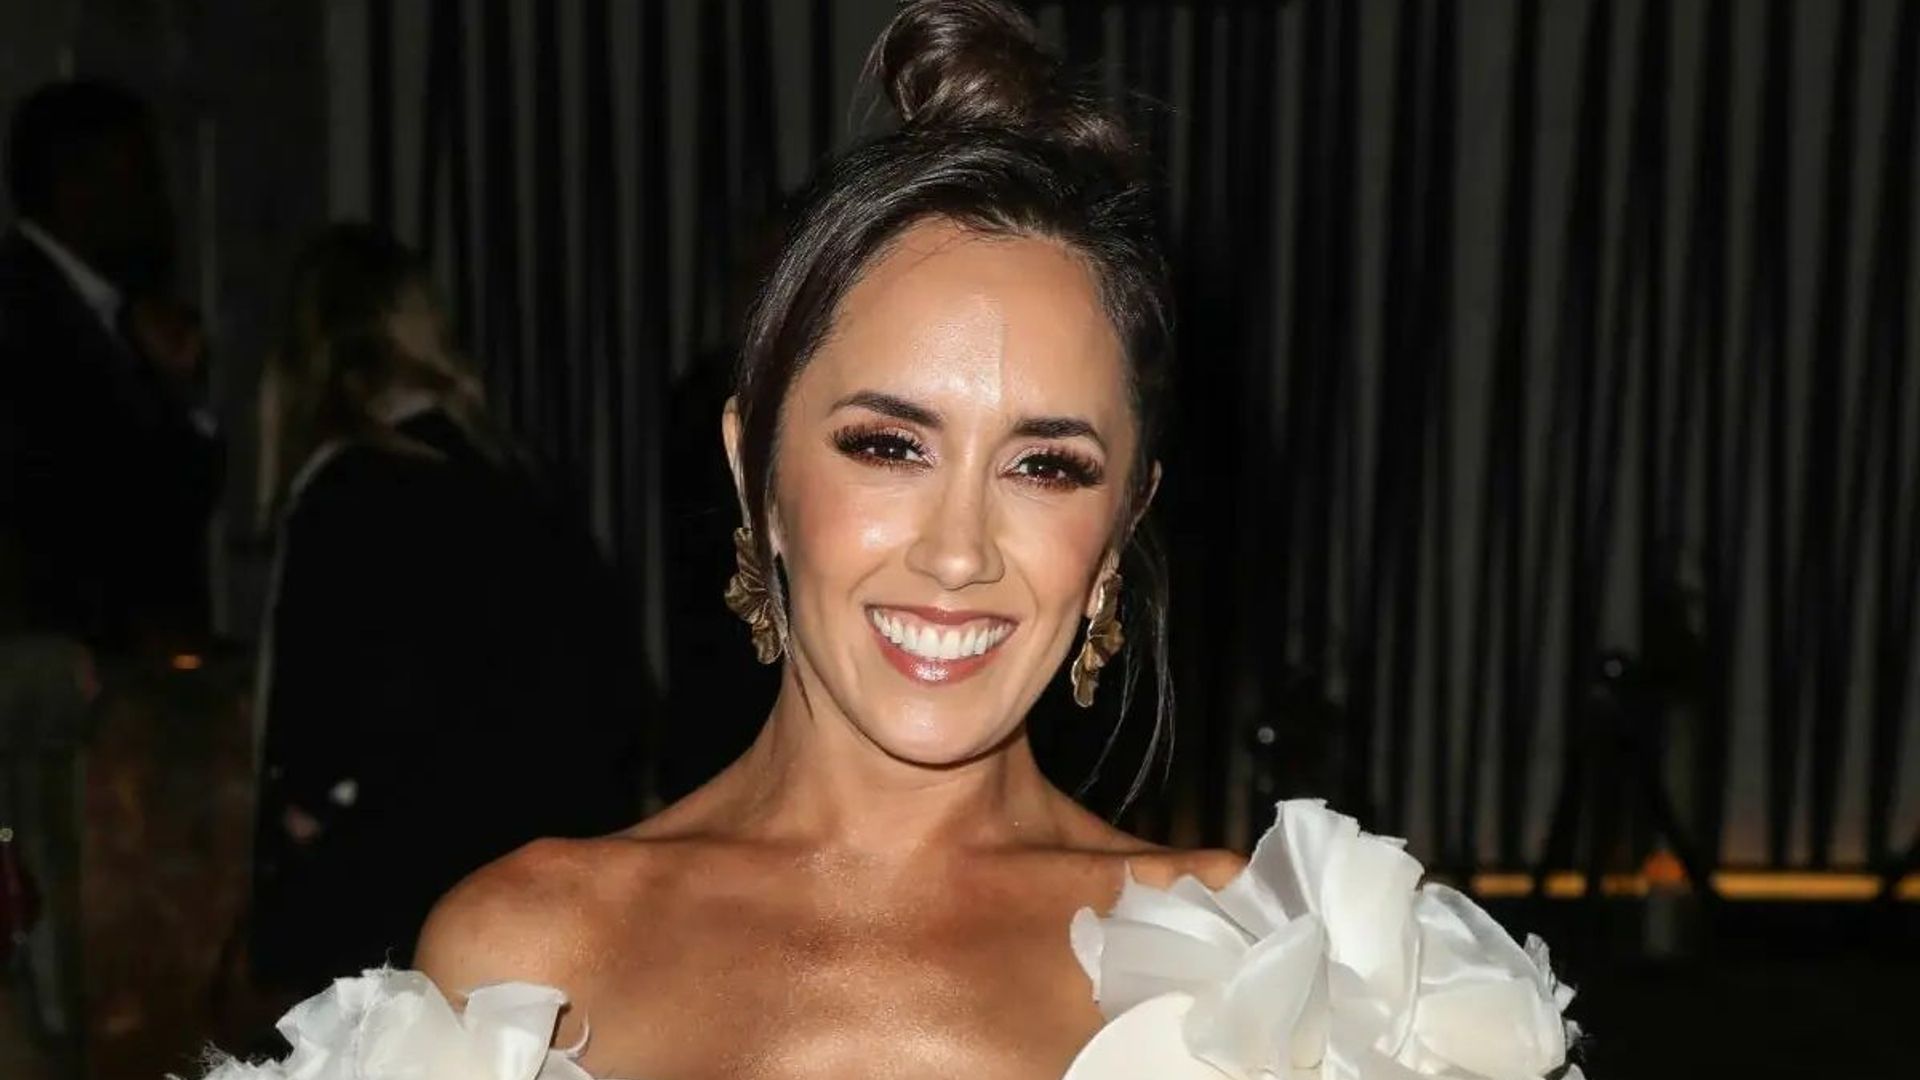 Janette Manrara shares unusual snap to celebrate It Takes Two star Rylan Clark-Neal’s birthday